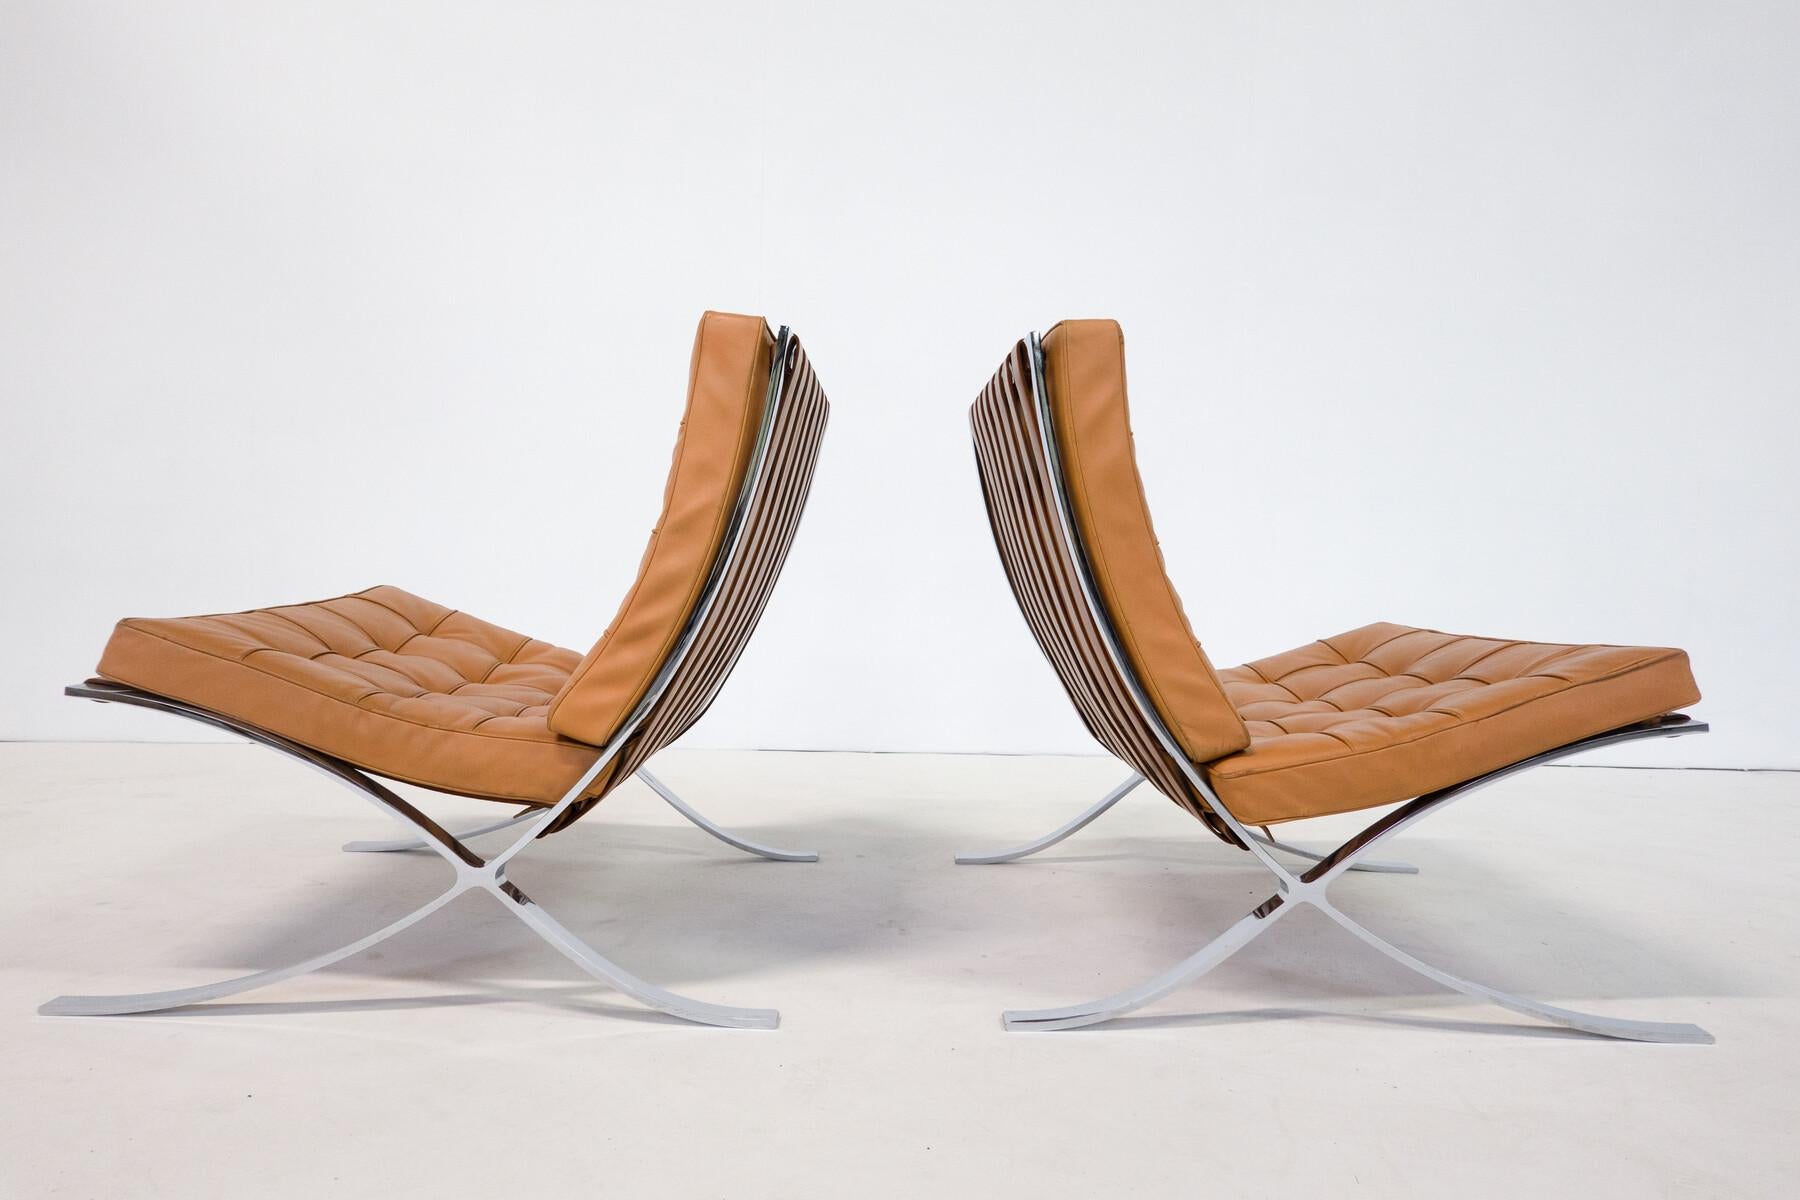 Pair of Cognac Leather Barcelona Chairs by Mies Van Der Rohe for Knoll, 1960s For Sale 8